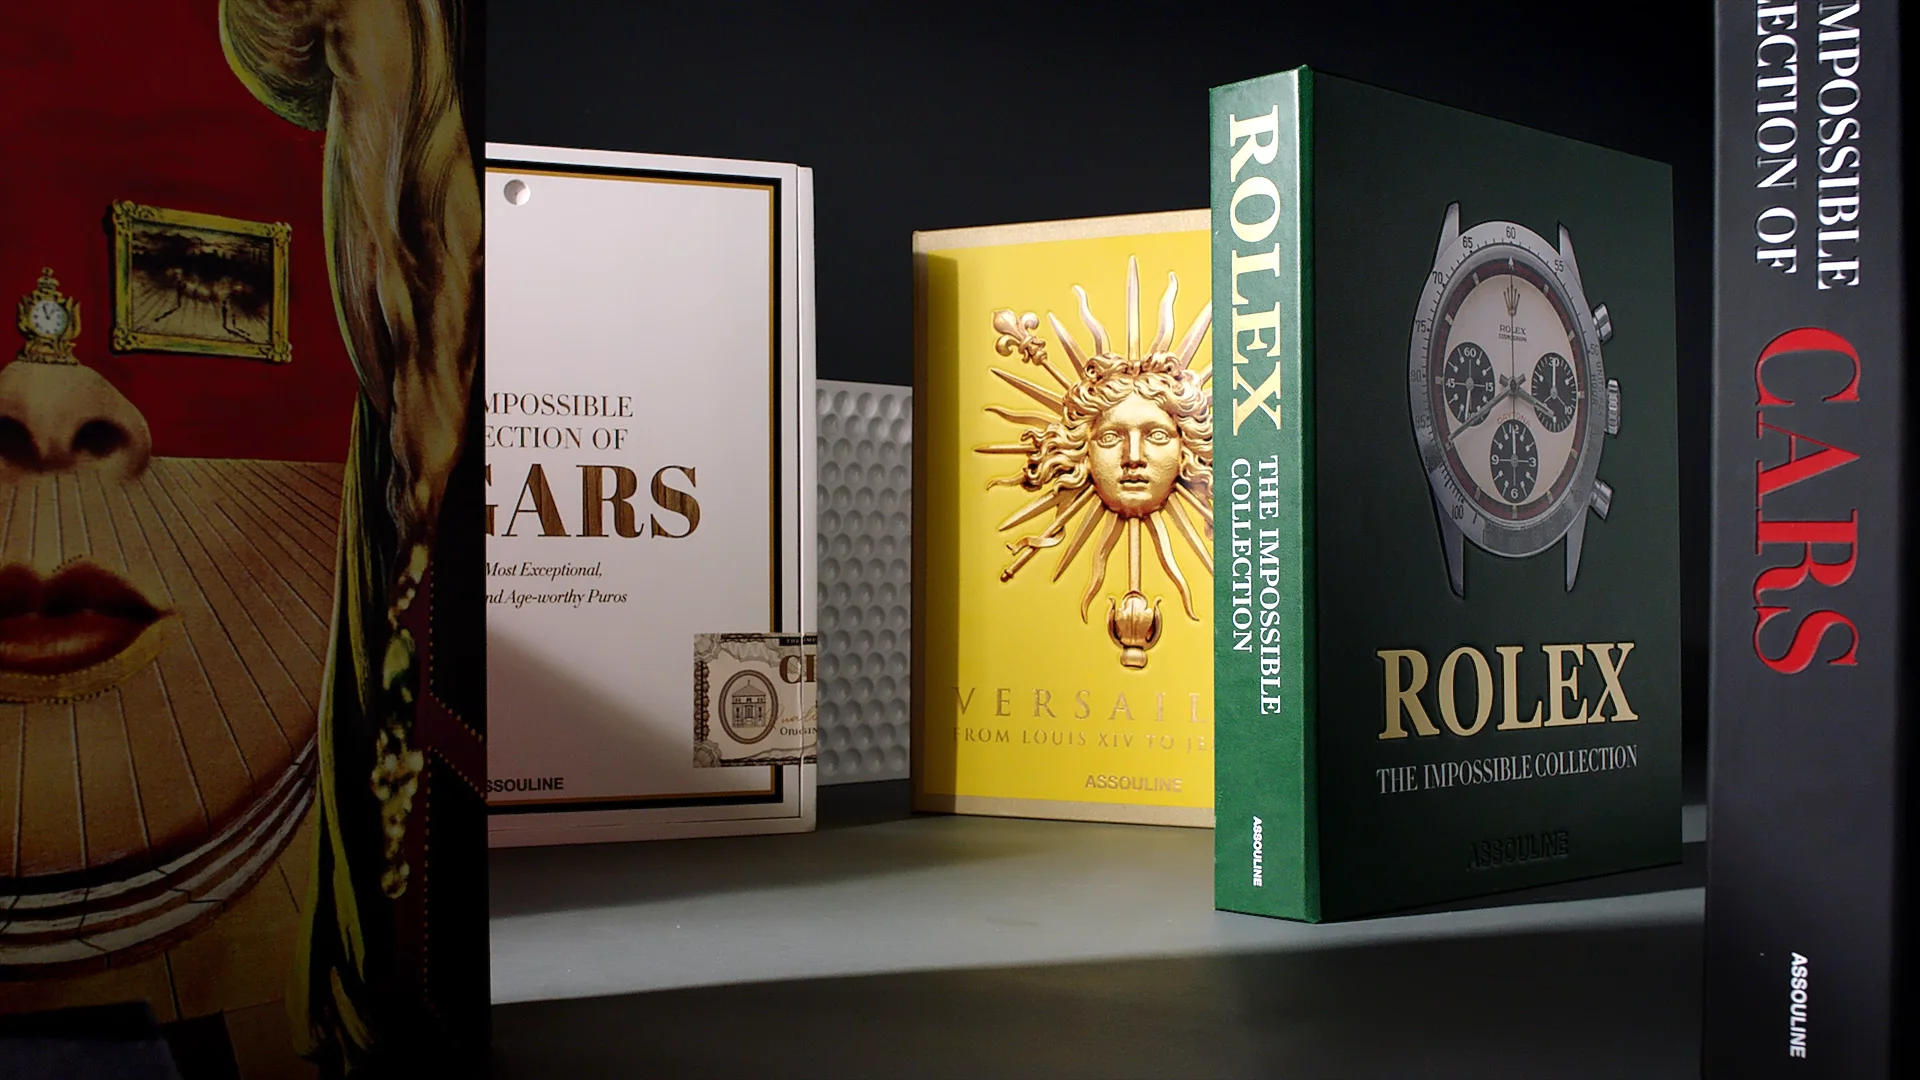 Assouline Versailles: from Louis XIV to Jeff Koons